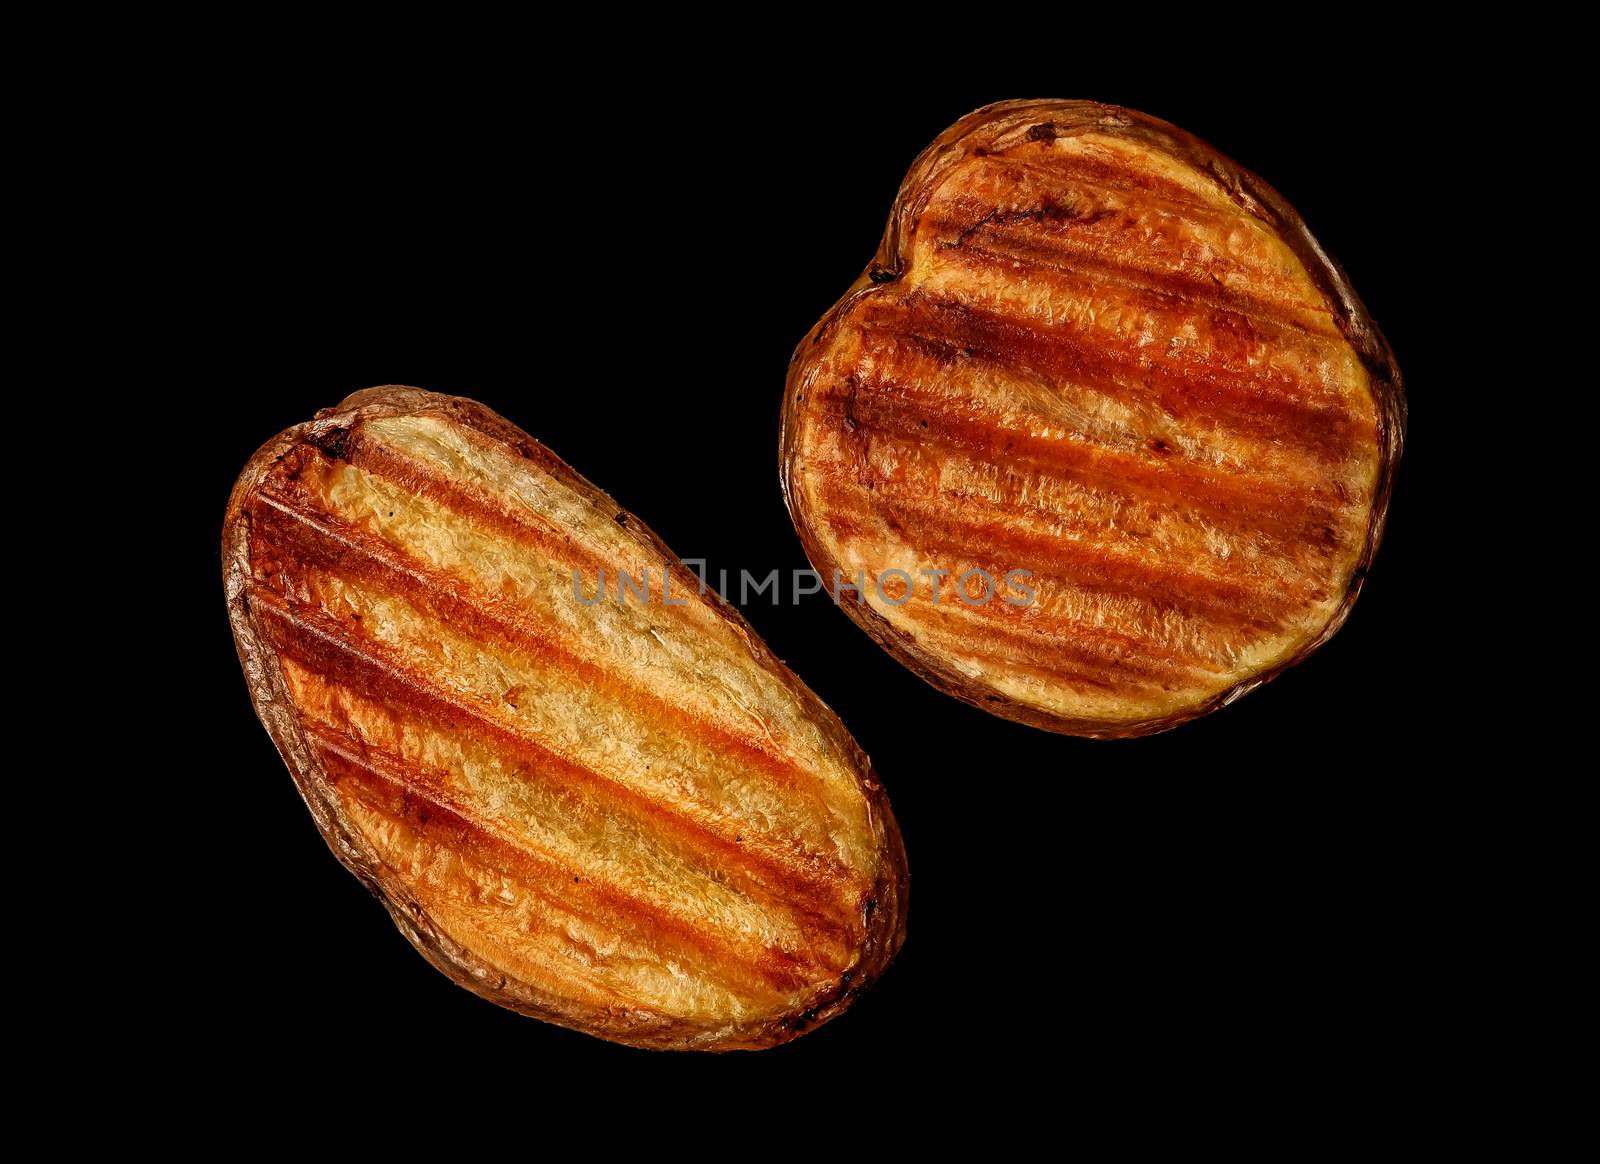 Two slices of grilled potatoes on a black background